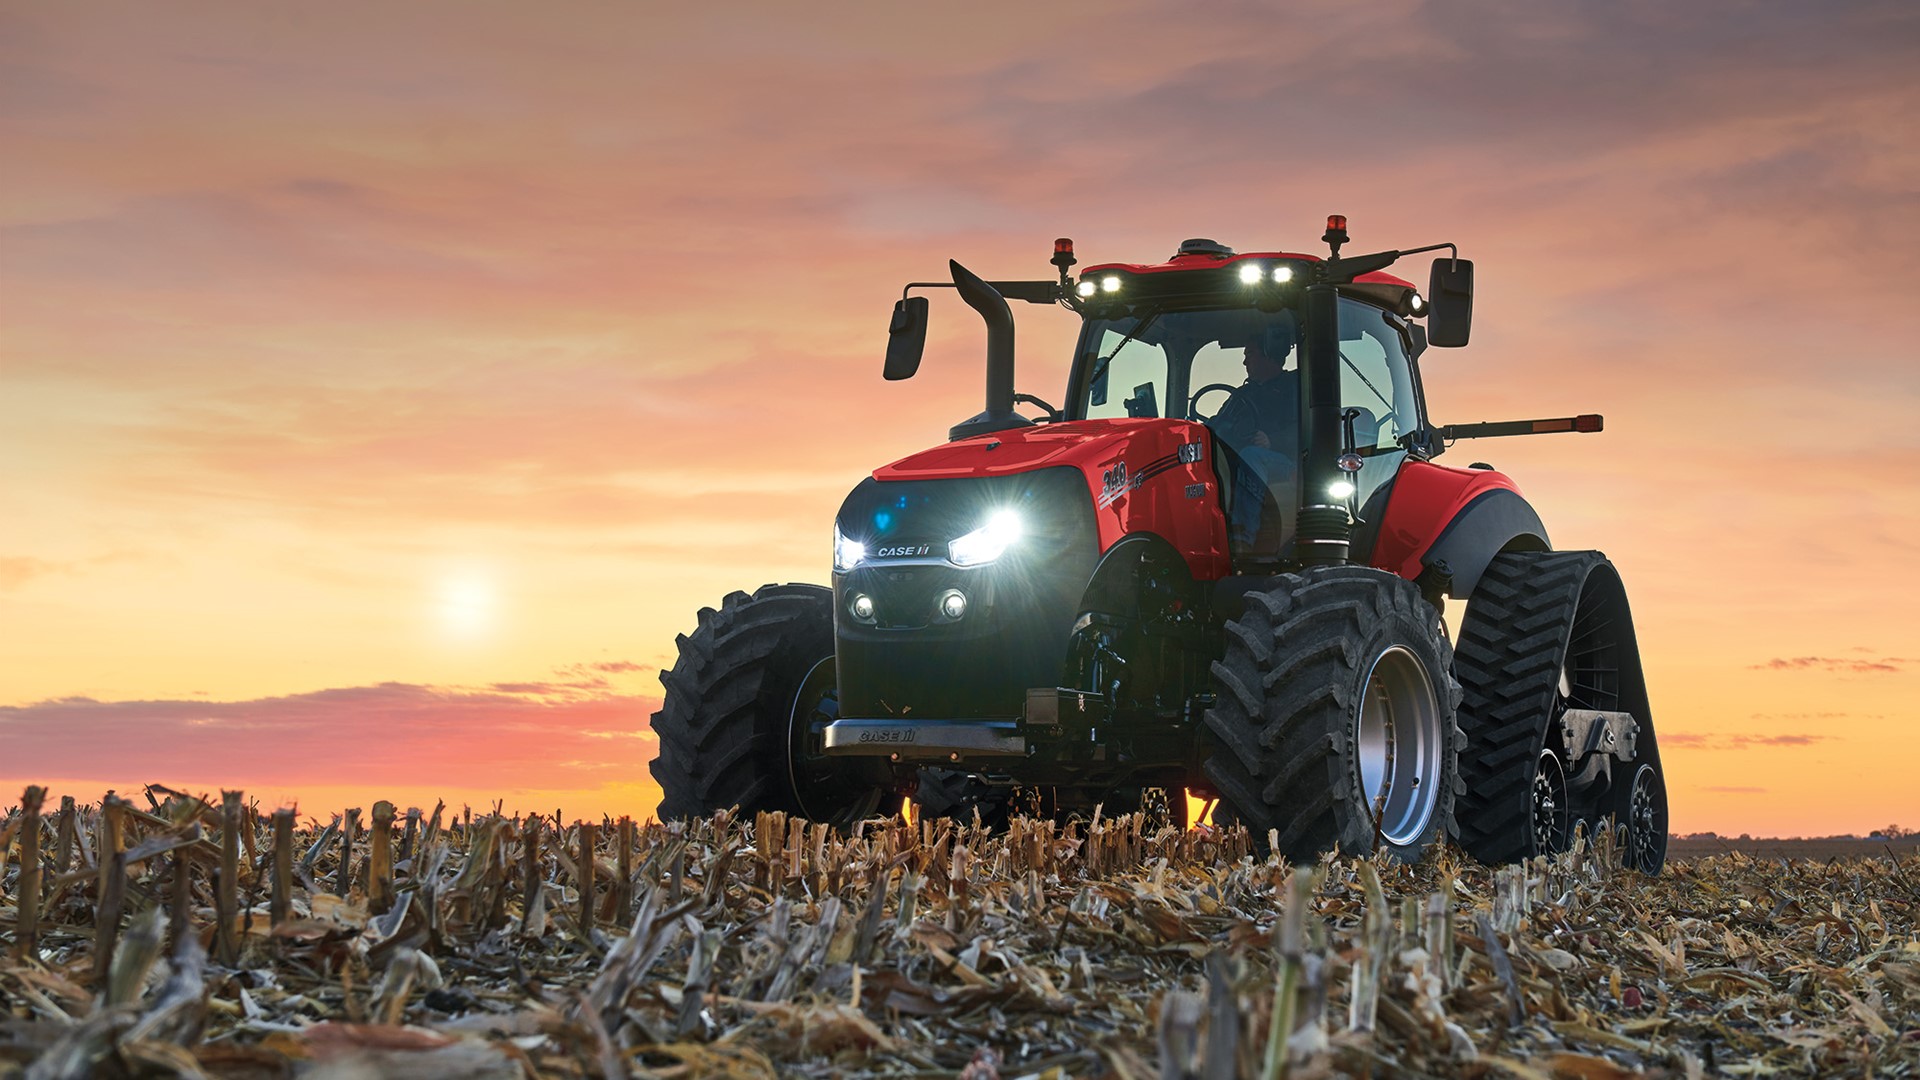 New AFS Connect Magnum series tractors from Case IH provide connectivity and visibility